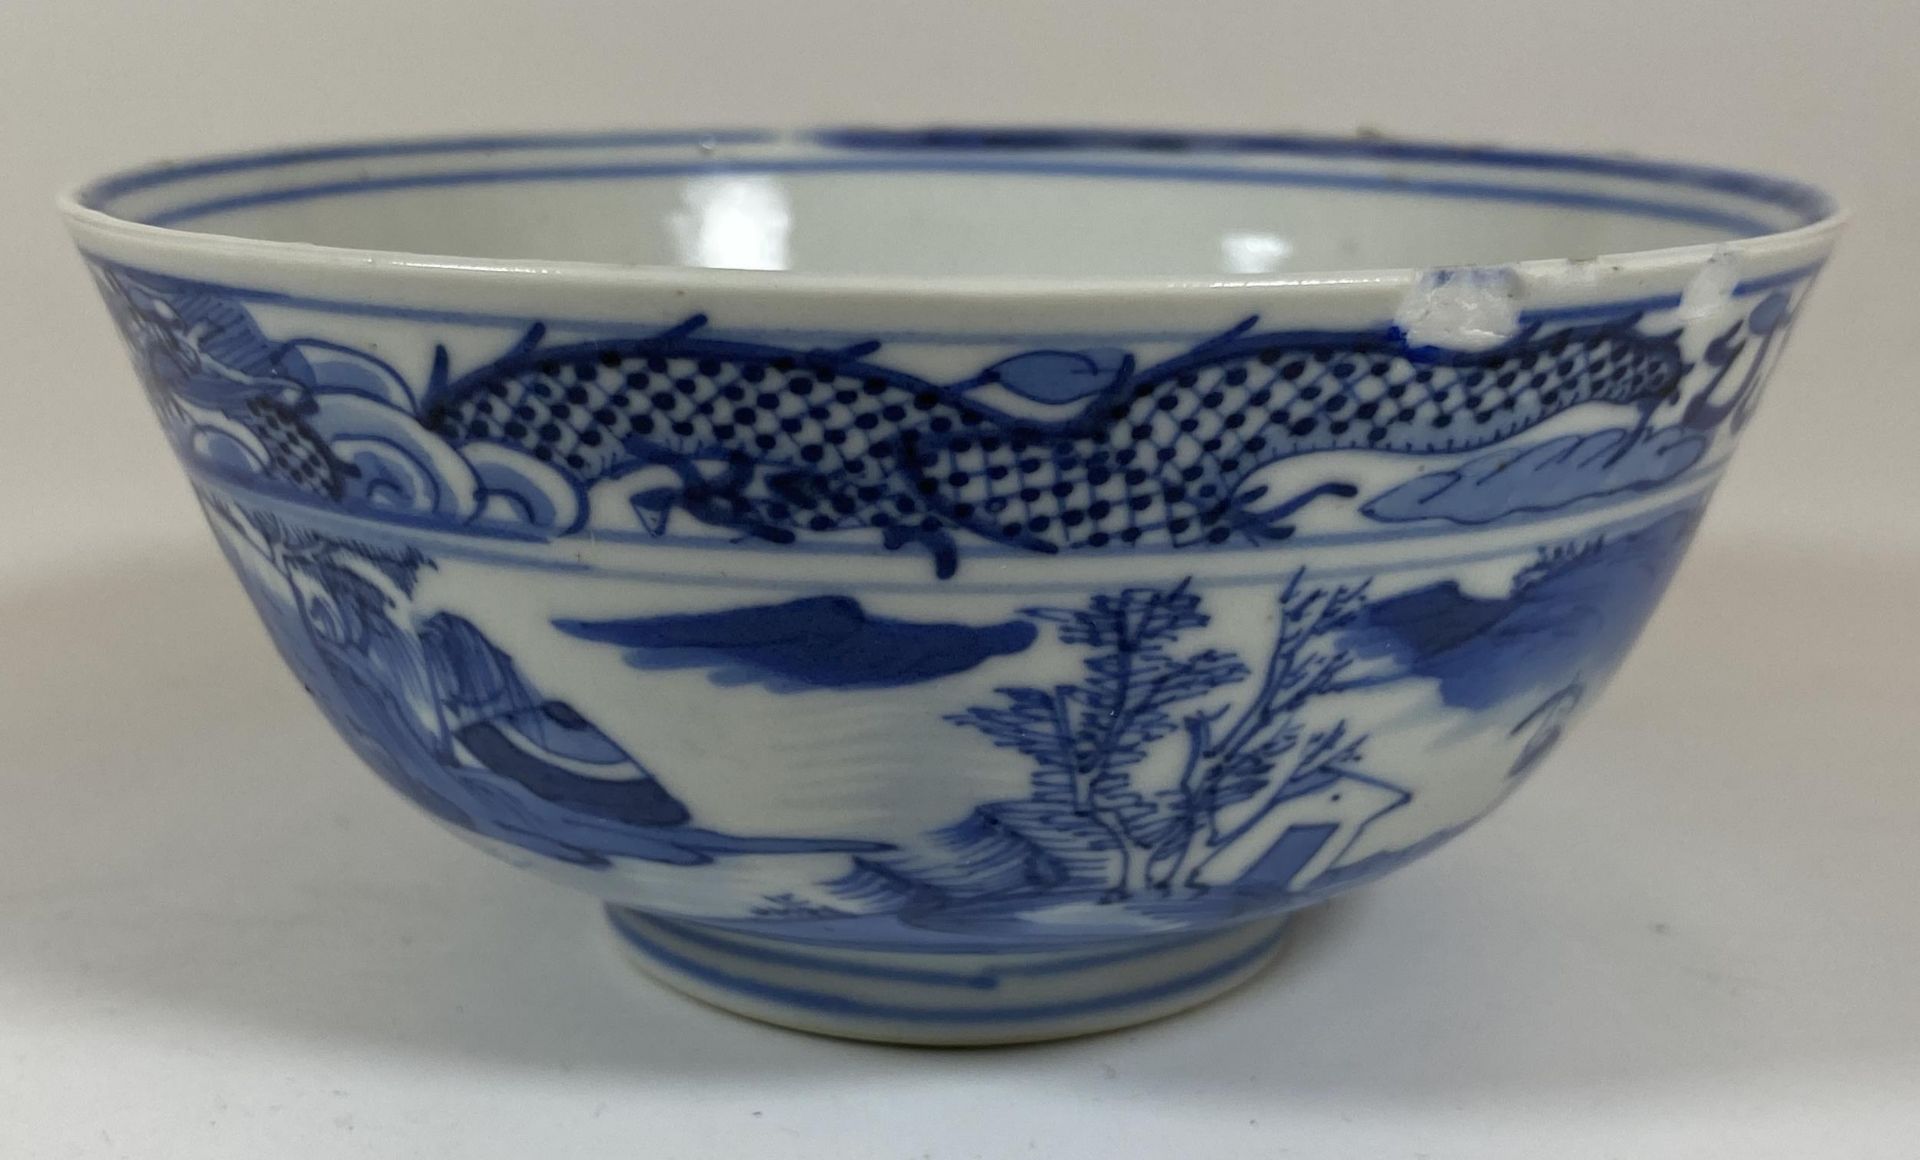 A 19TH CENTURY CHINESE KANGXI STYLE BLUE AND WHITE DRAGON DESIGN BOWL, FOUR CHARACTER MARK TO